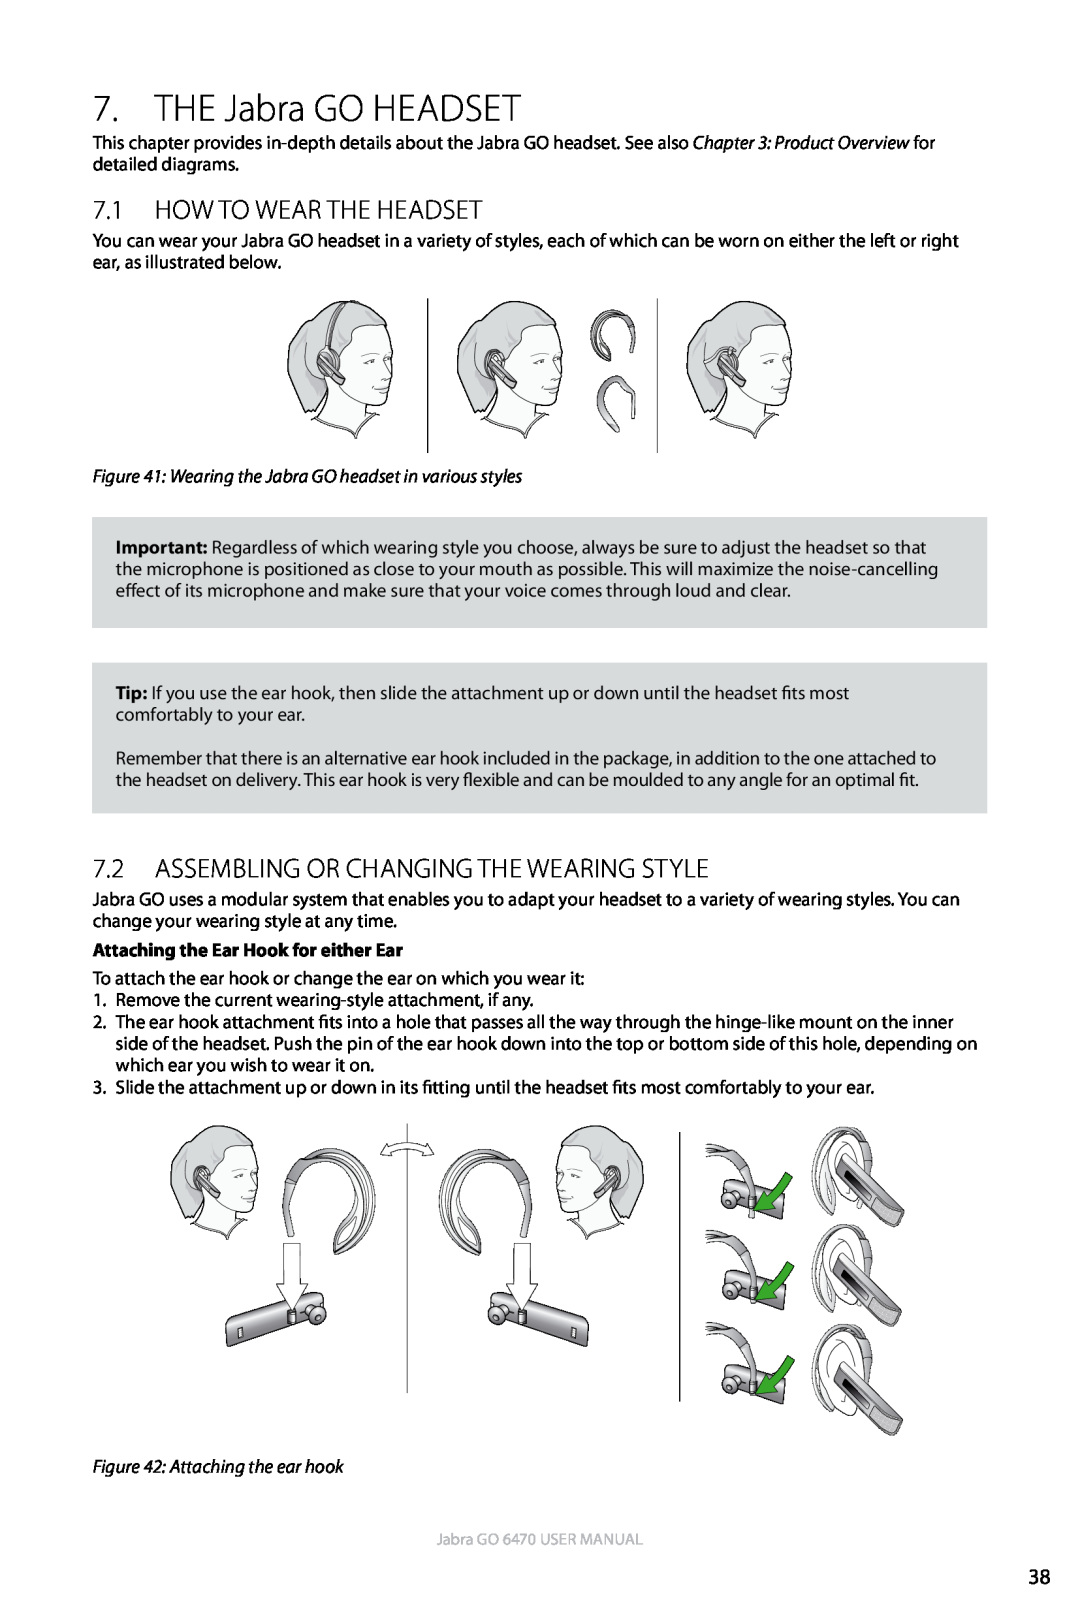 Jabra GO 6470 user manual The Jabra GO Headset, 7.1How to Wear the Headset, 7.2Assembling or Changing the Wearing Style 